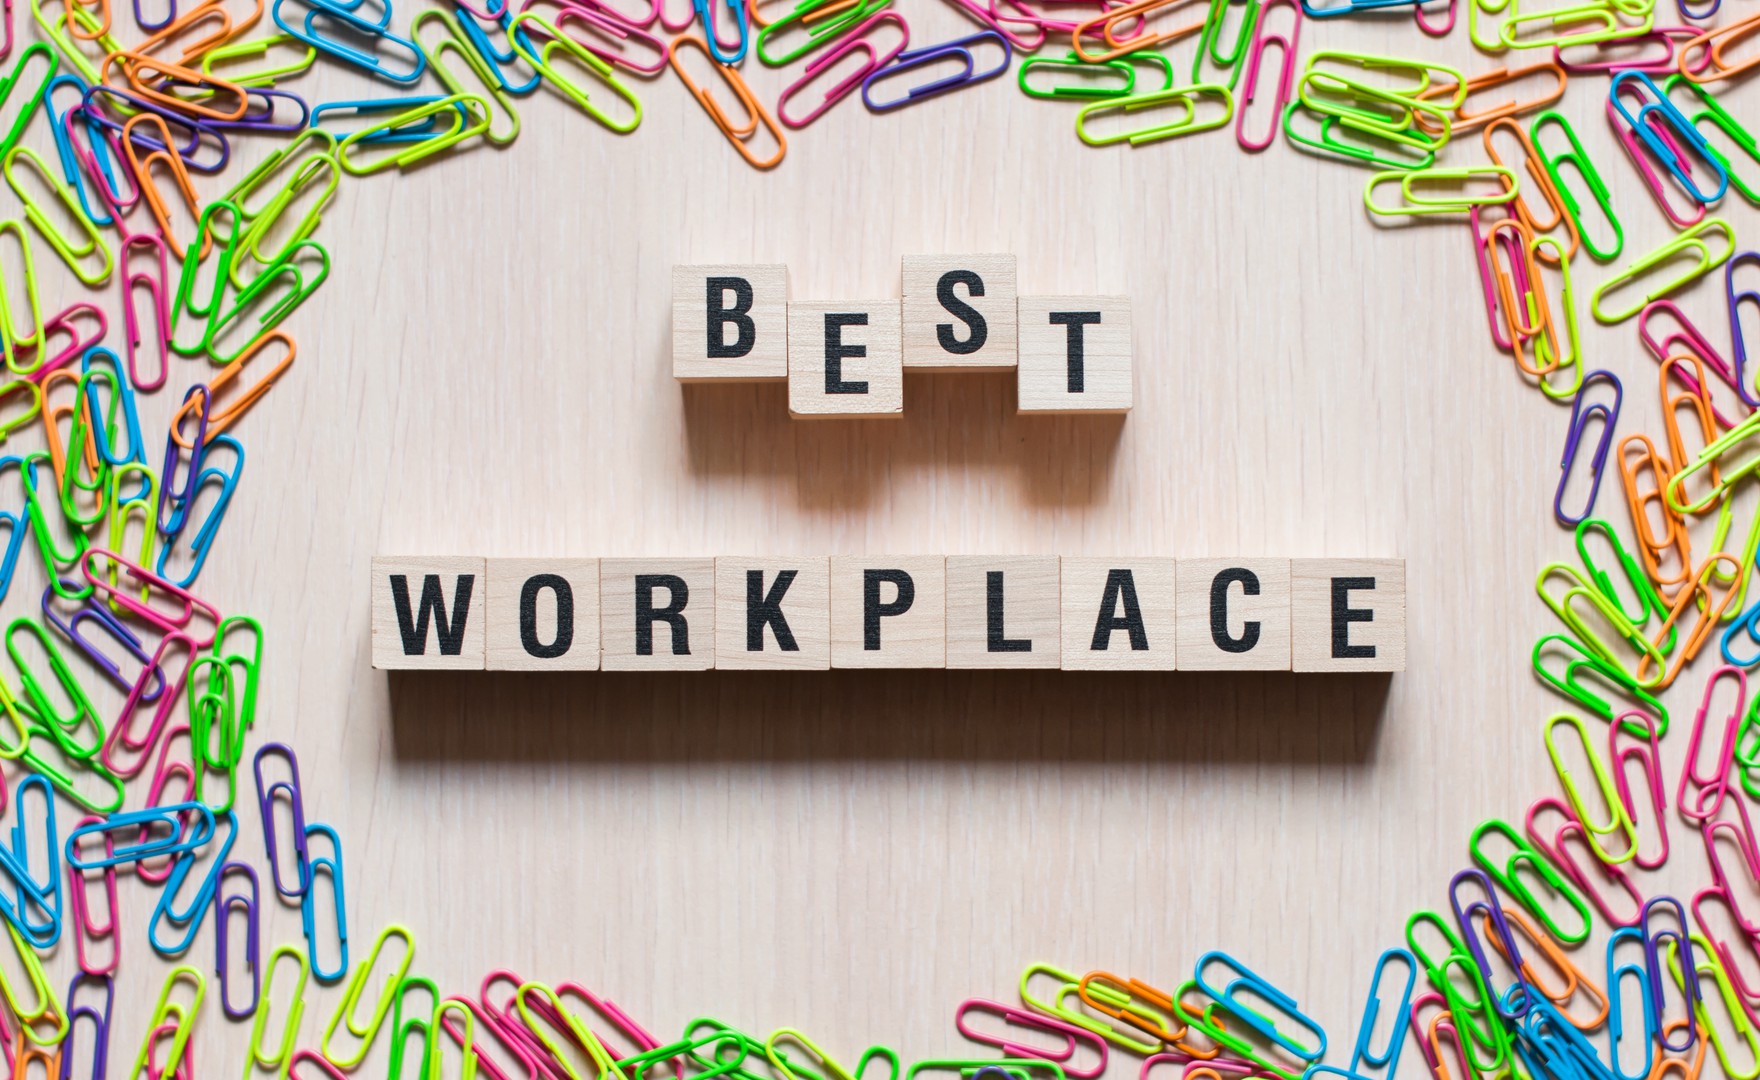 Sunday Times Top 100 Best Places to Work coaching culture